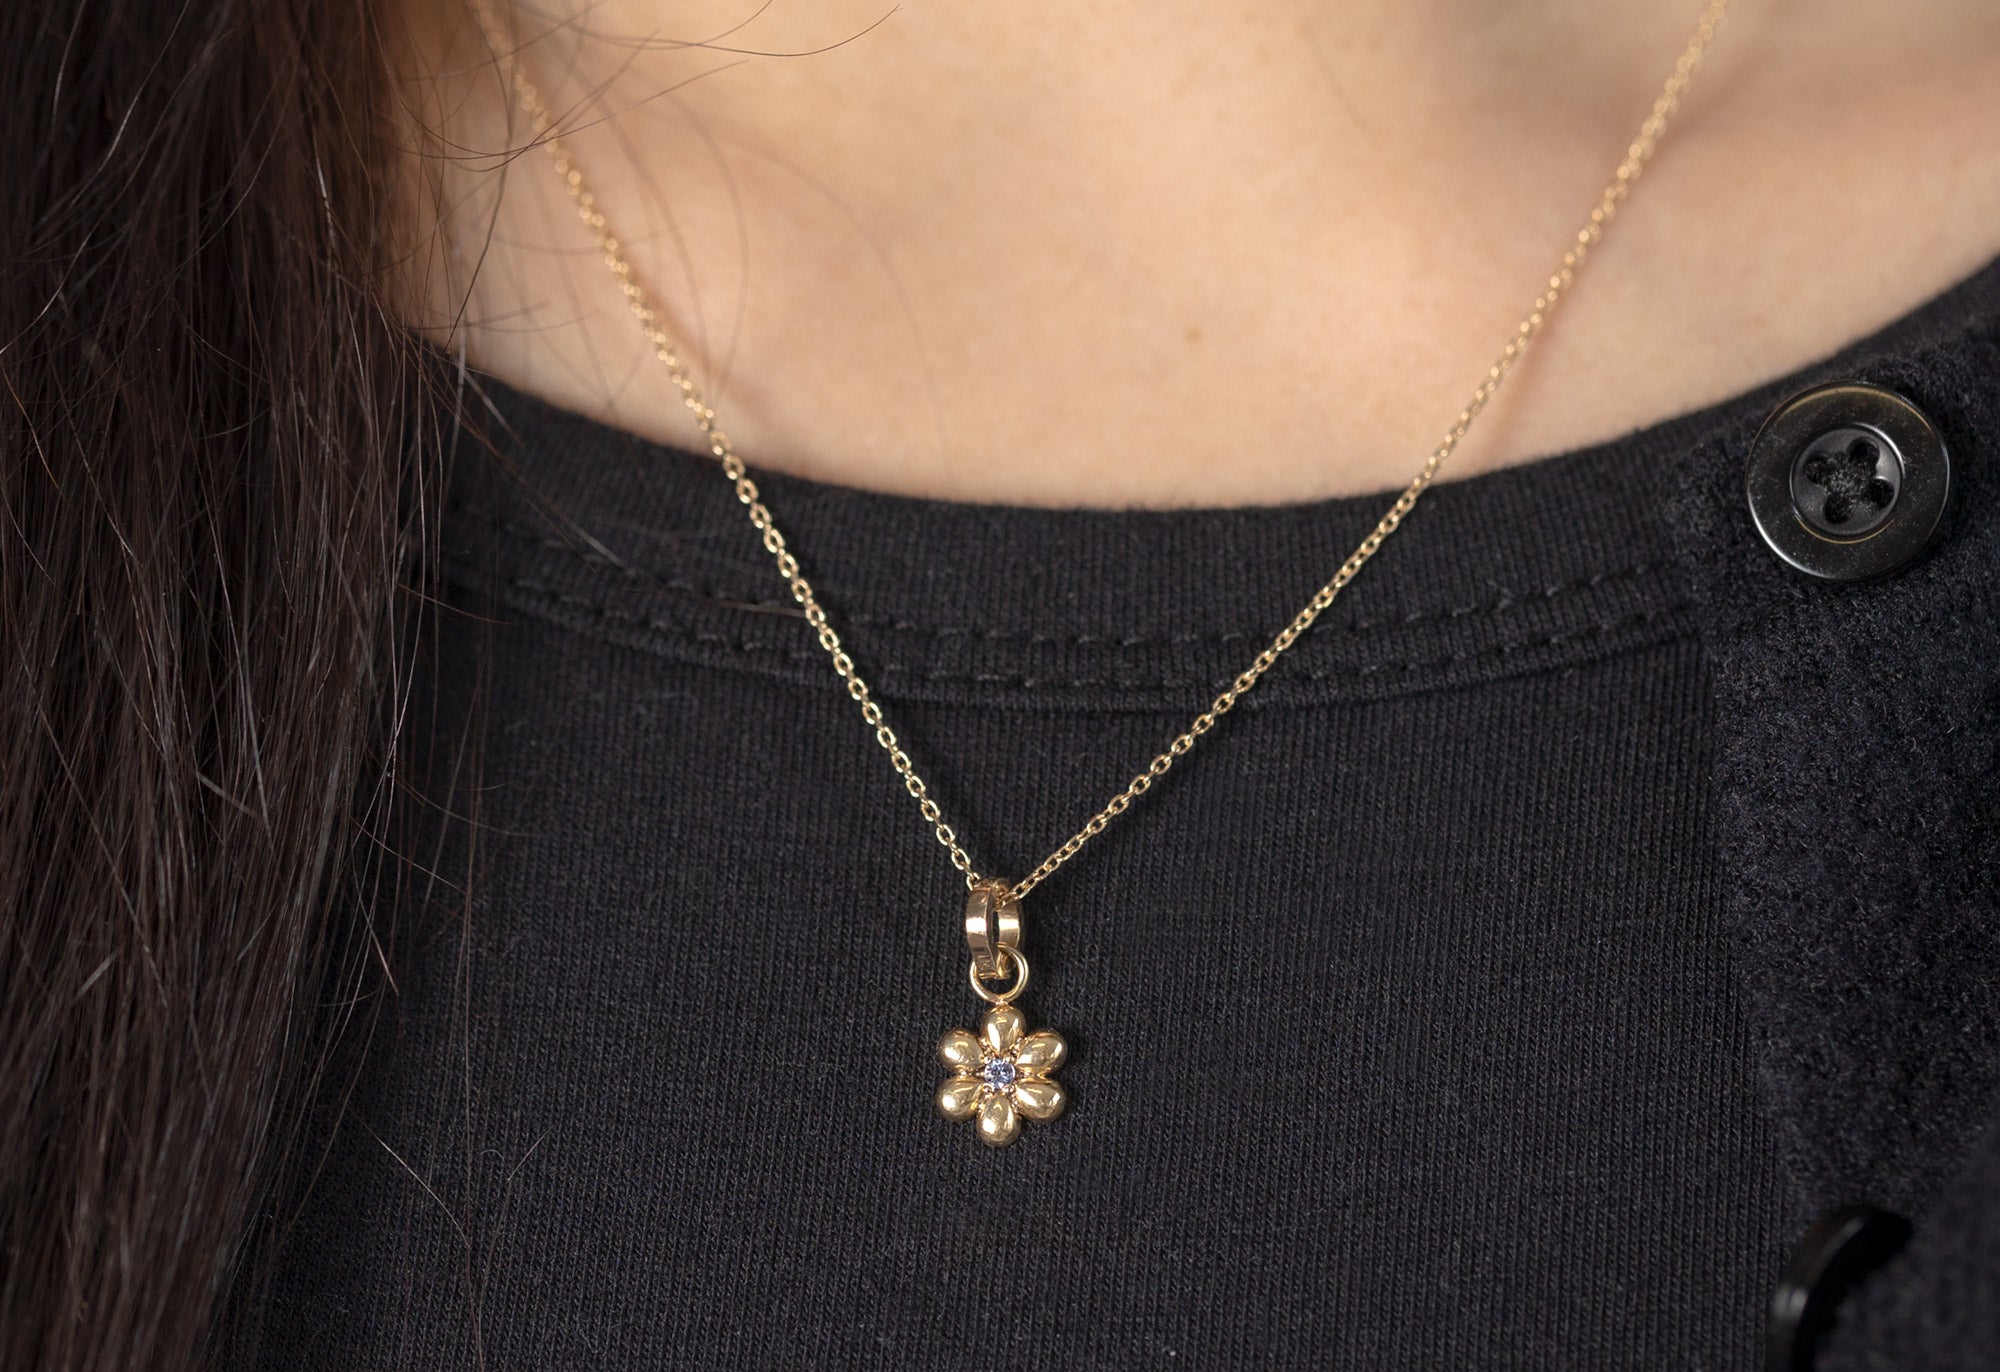 The Diamond-Cut Cable Chain Charm Necklace